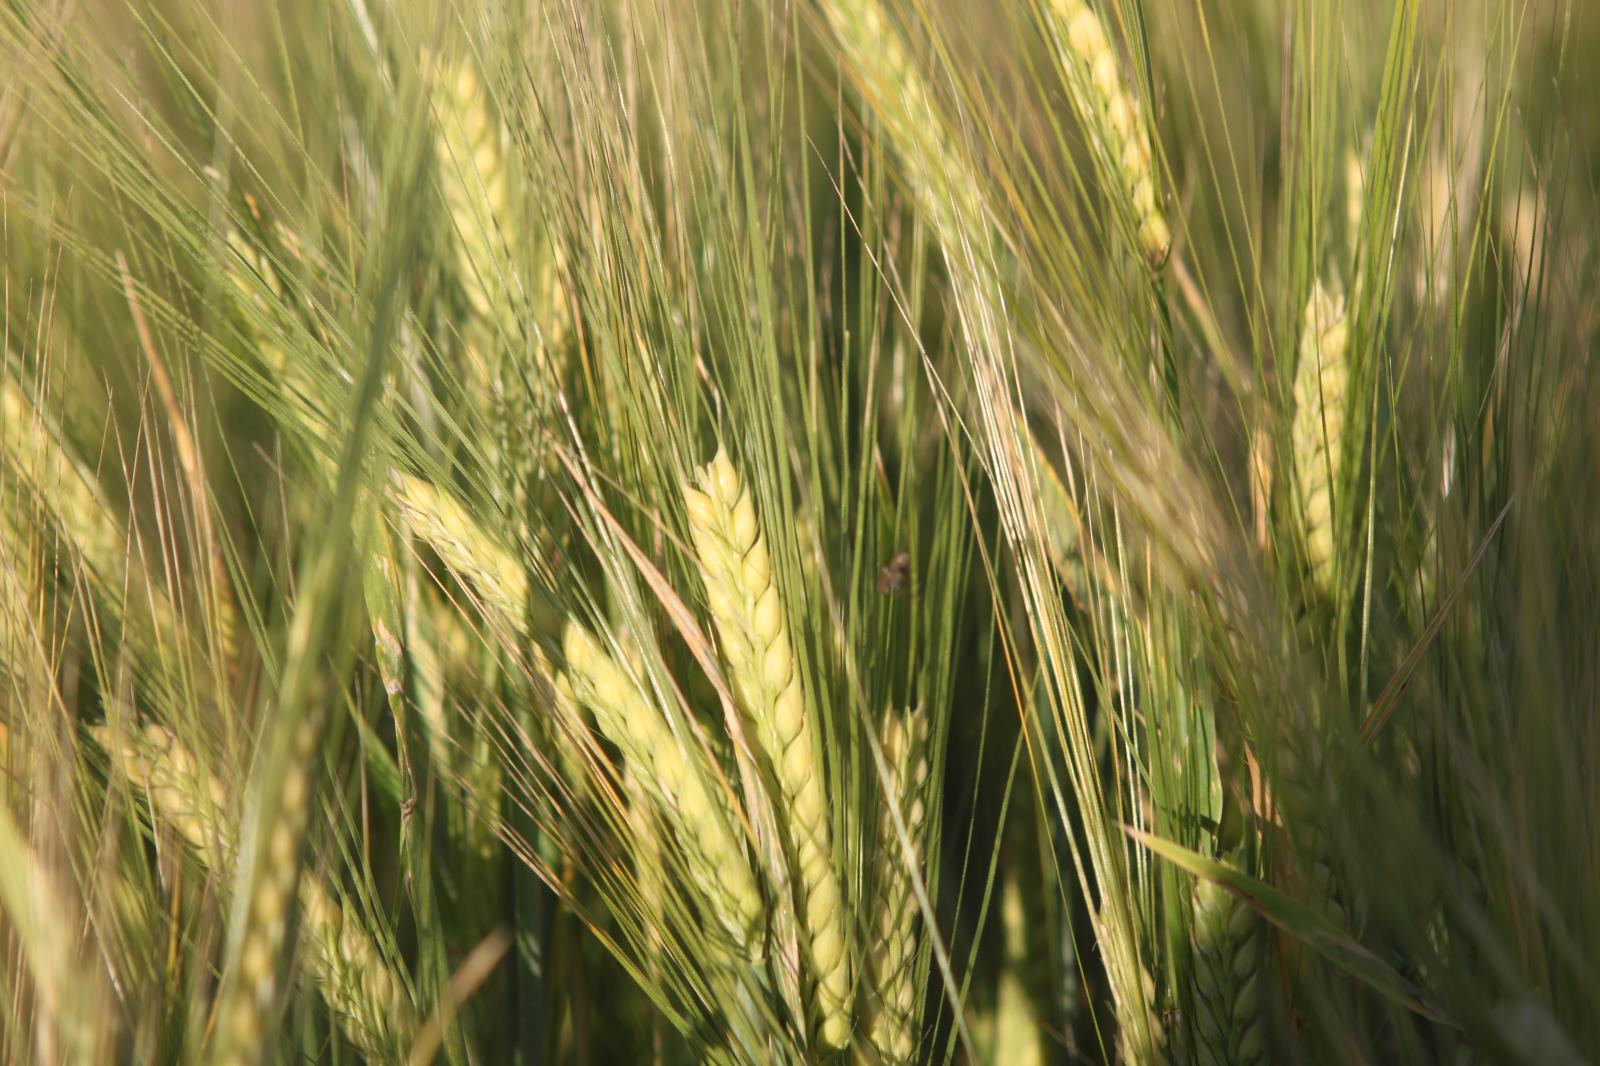 Barley grows in a field near Idaho Falls last year. The Idaho Barley Commission’s fiscal year 2019-2020 budget is heavy on research, as always.